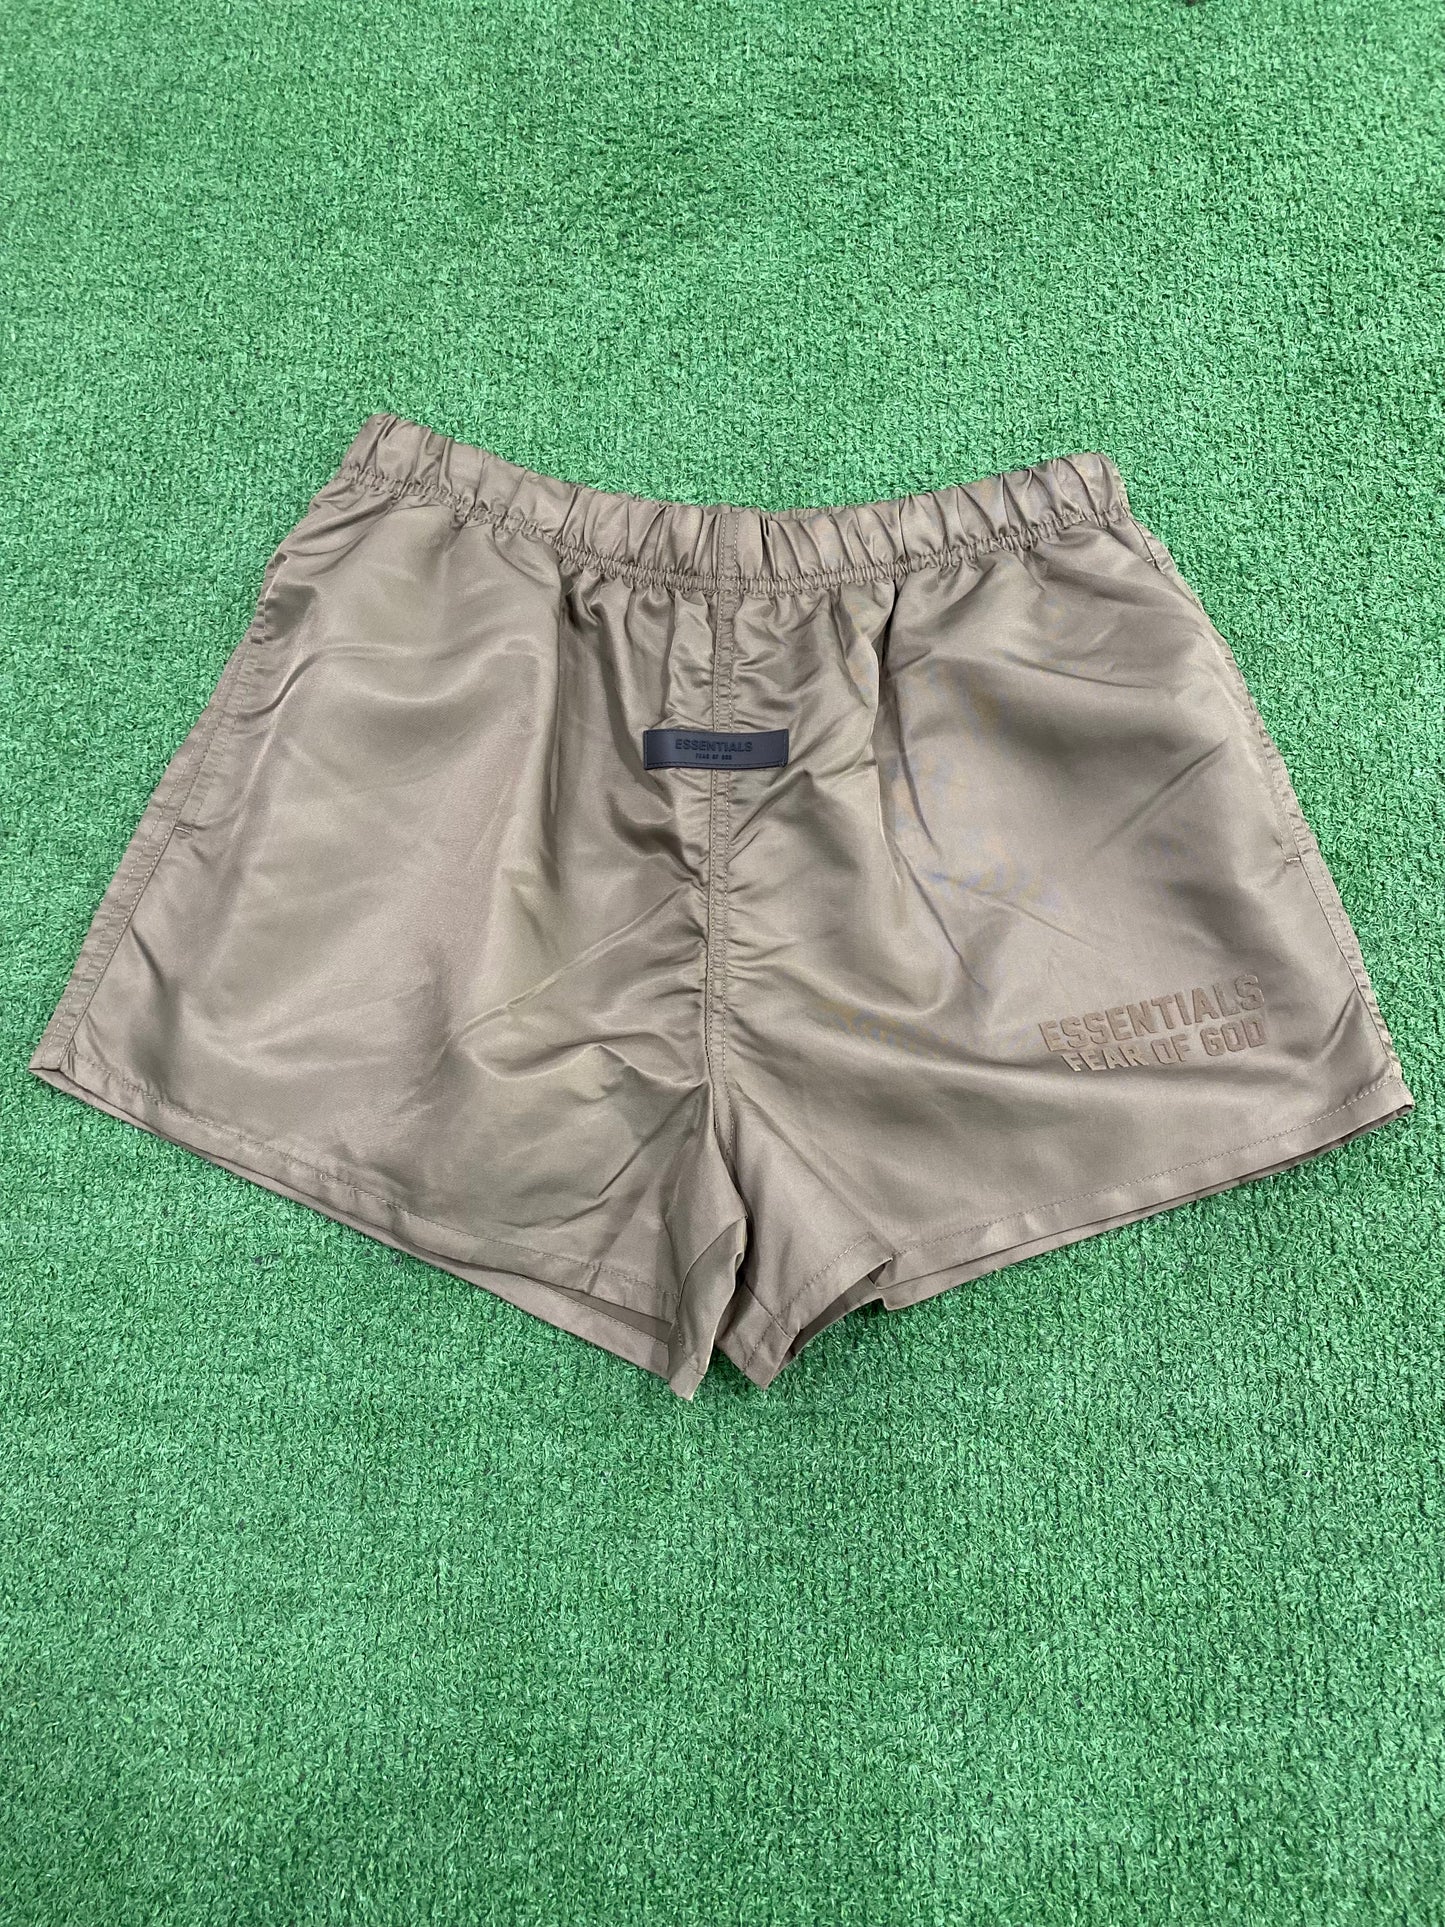 Fear of God Essentials Nylon Running Shorts Wood, Shorts - Sneakersbe Sneakers Sale Online